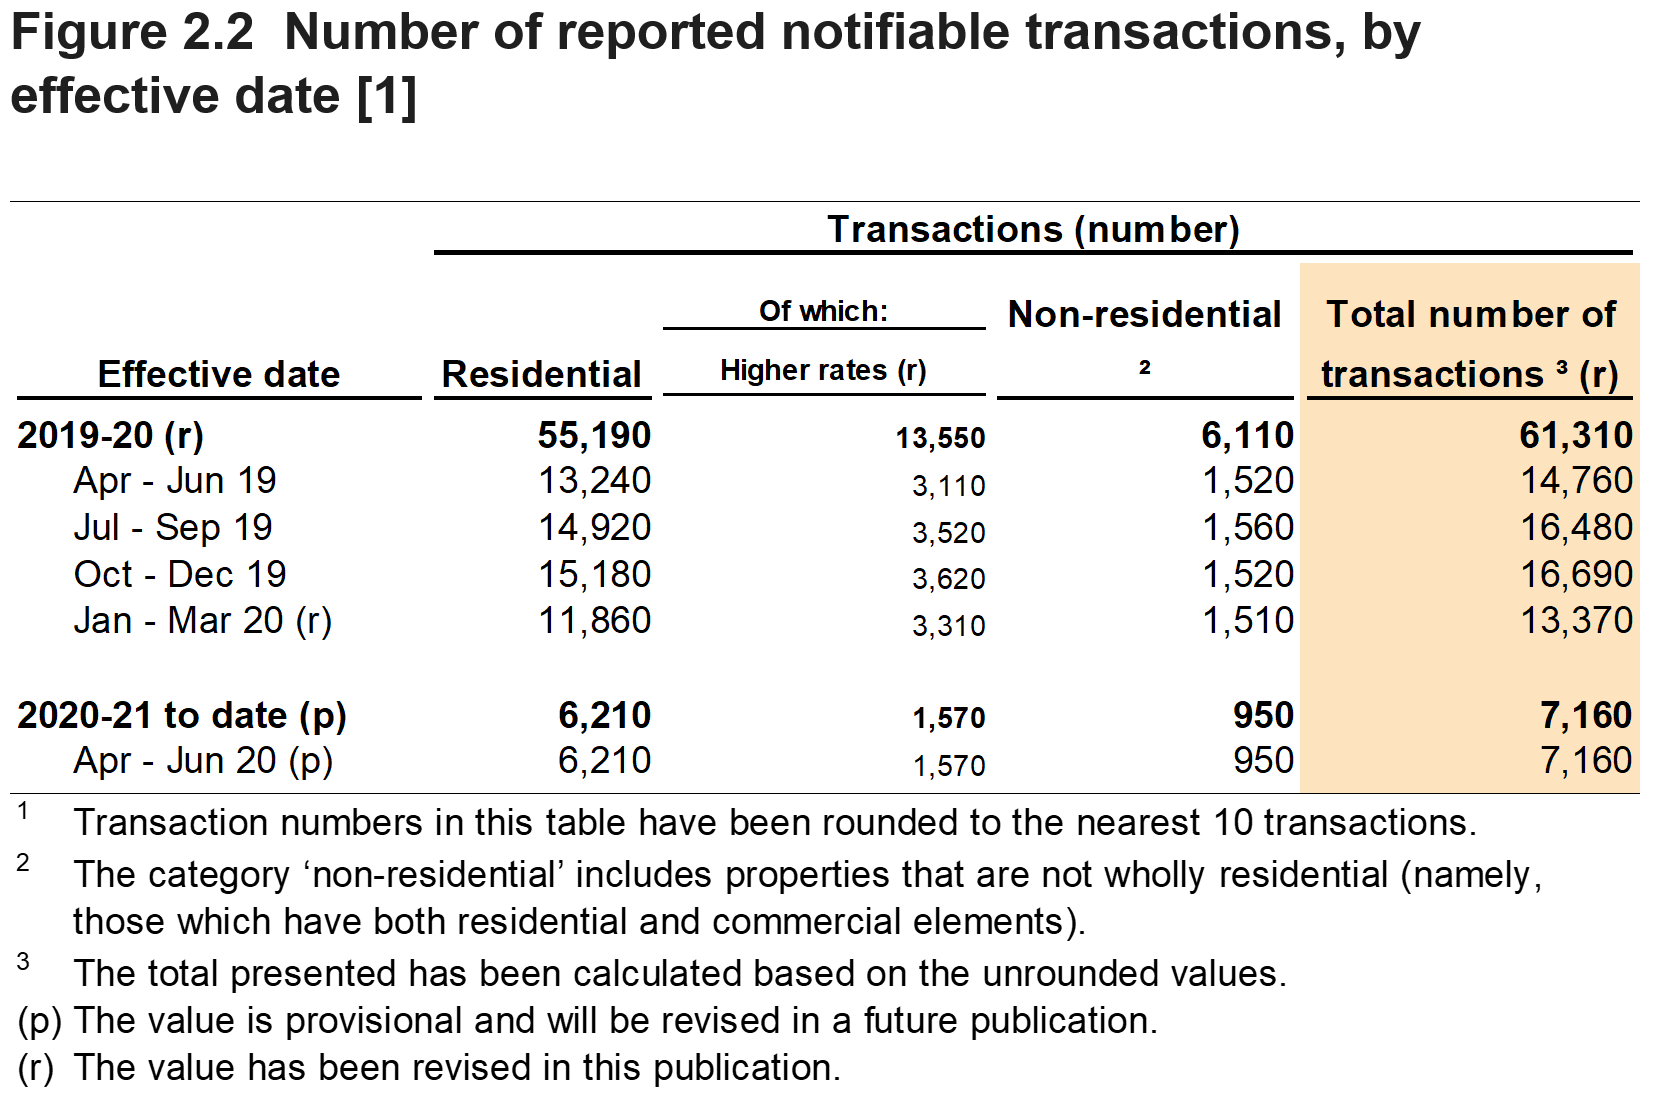 Figure 2.2 shows the number of reported notifiable transactions, by the quarter and year in which they were effective. Figure 2.2 also shows a breakdown for residential and non-residential transactions.